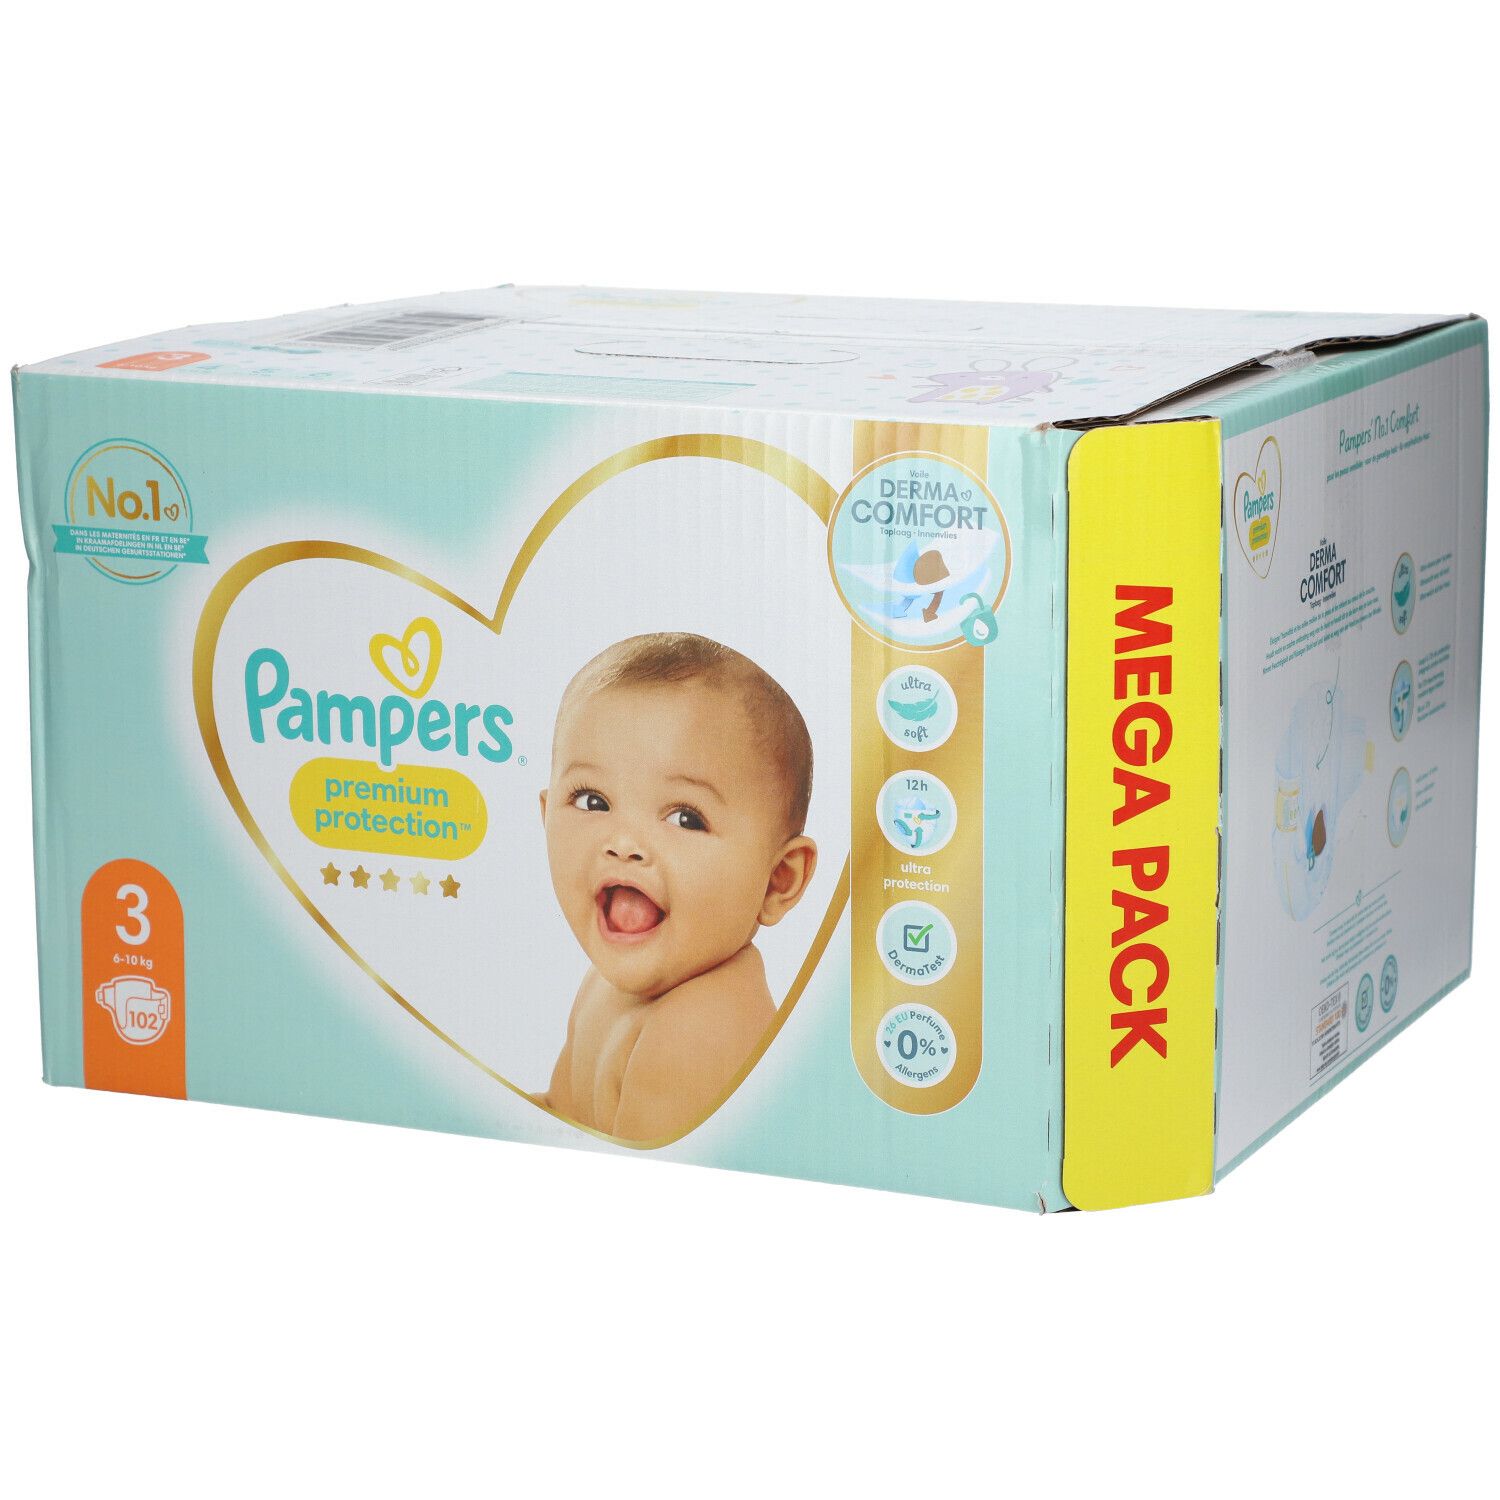 PAMPERS® Pampers Premium Protection taille 4, 25 pcs bon marché